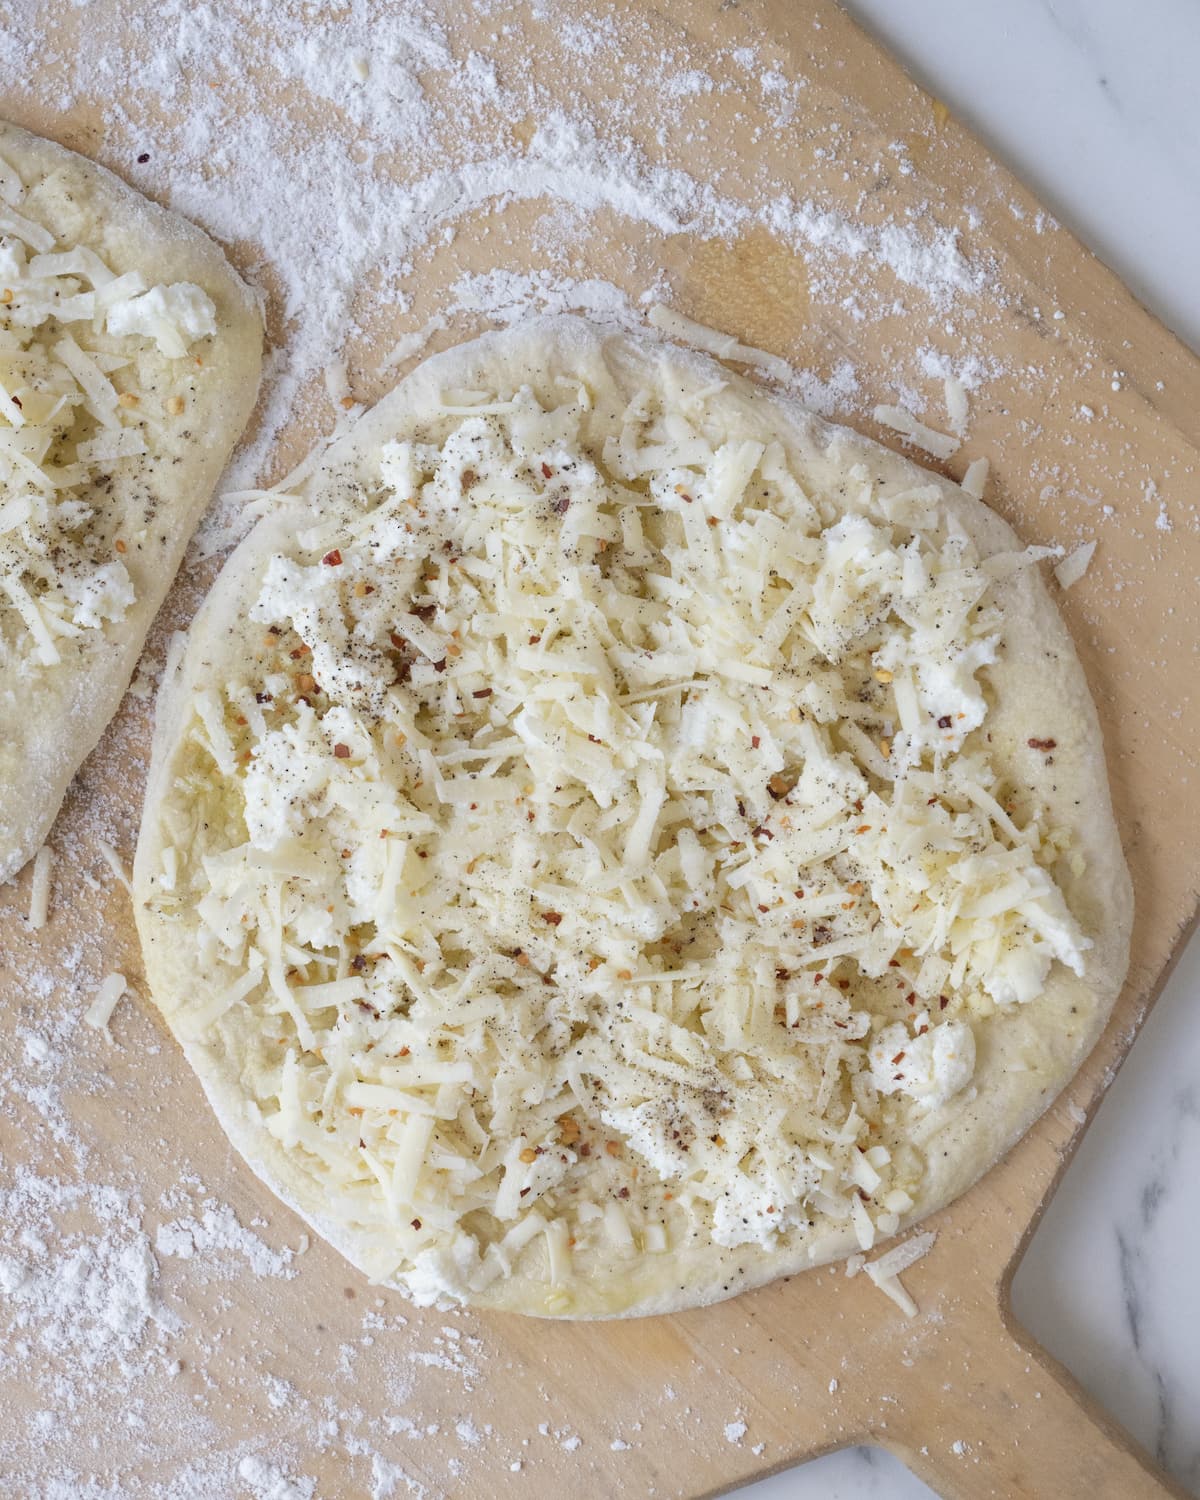 Rolled and shaped pizza dough divided into two pieces topped with olive oil and finely chopped garlic and cheeses and red pepper flakes on a wooden pizza peel sprinkled with flour